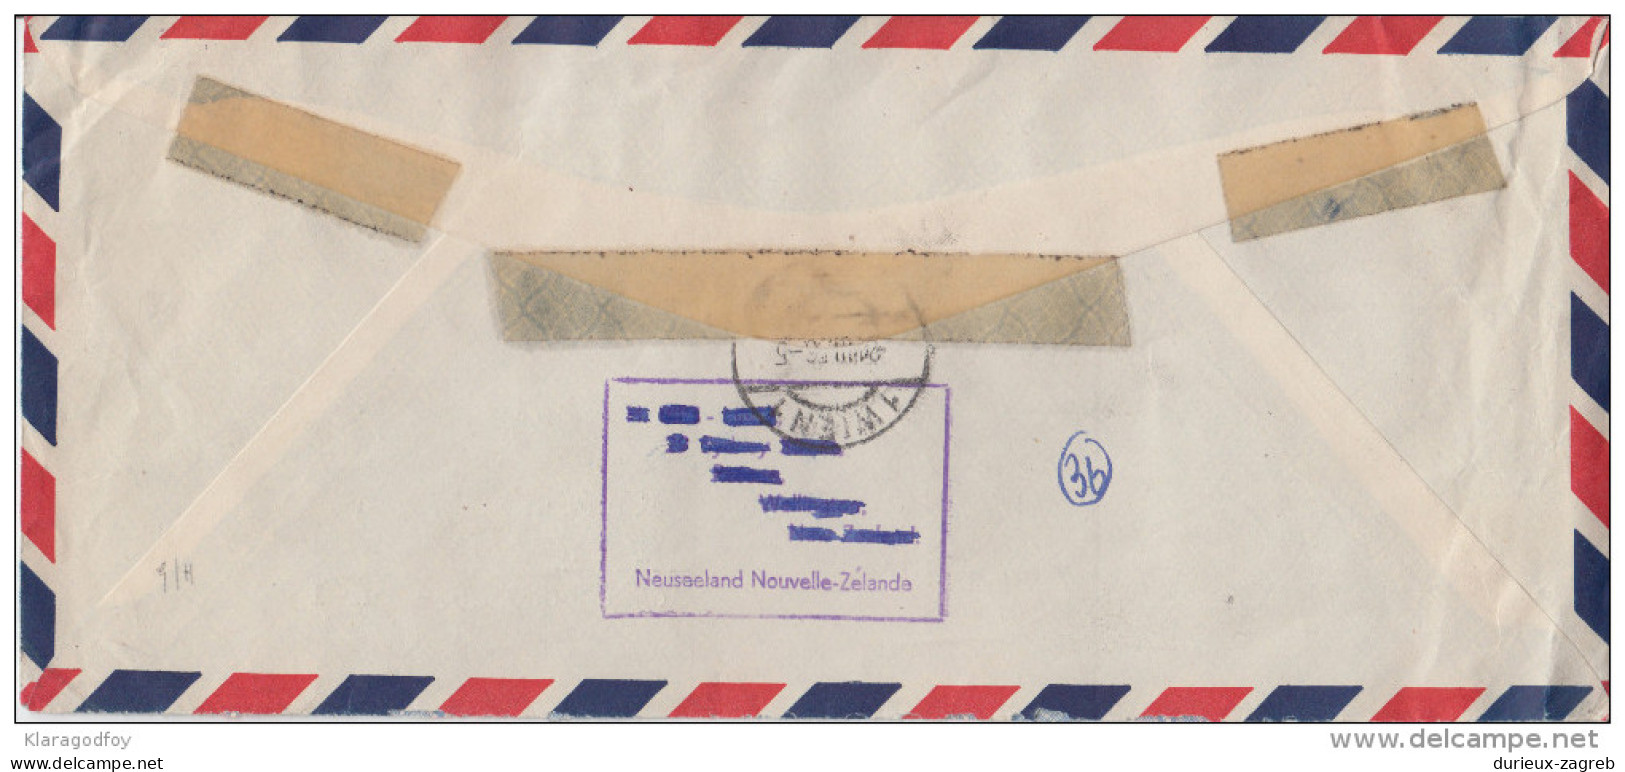 New Zealand Nice Air Mail Letter Cover Travelled To Austria 1956 B160711 - Storia Postale